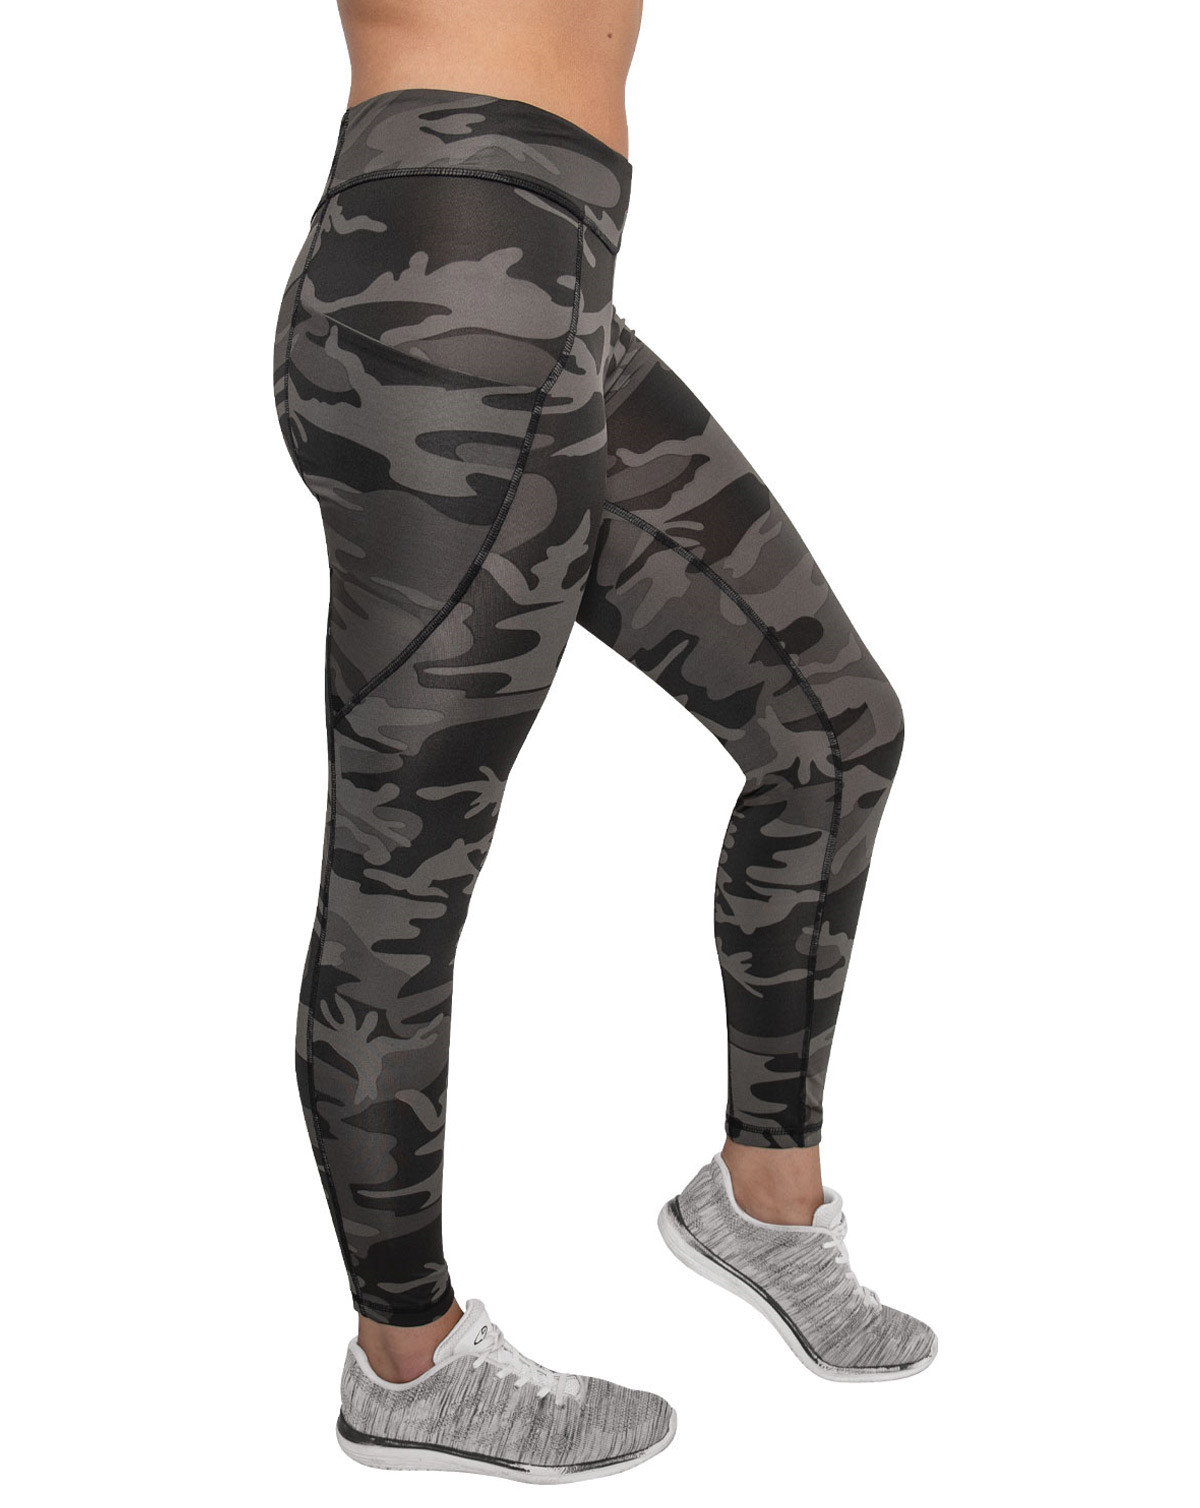 Billede af Rothco Womens Workout Performance Camo Leggings With Pockets (Black Camo, 2XL)